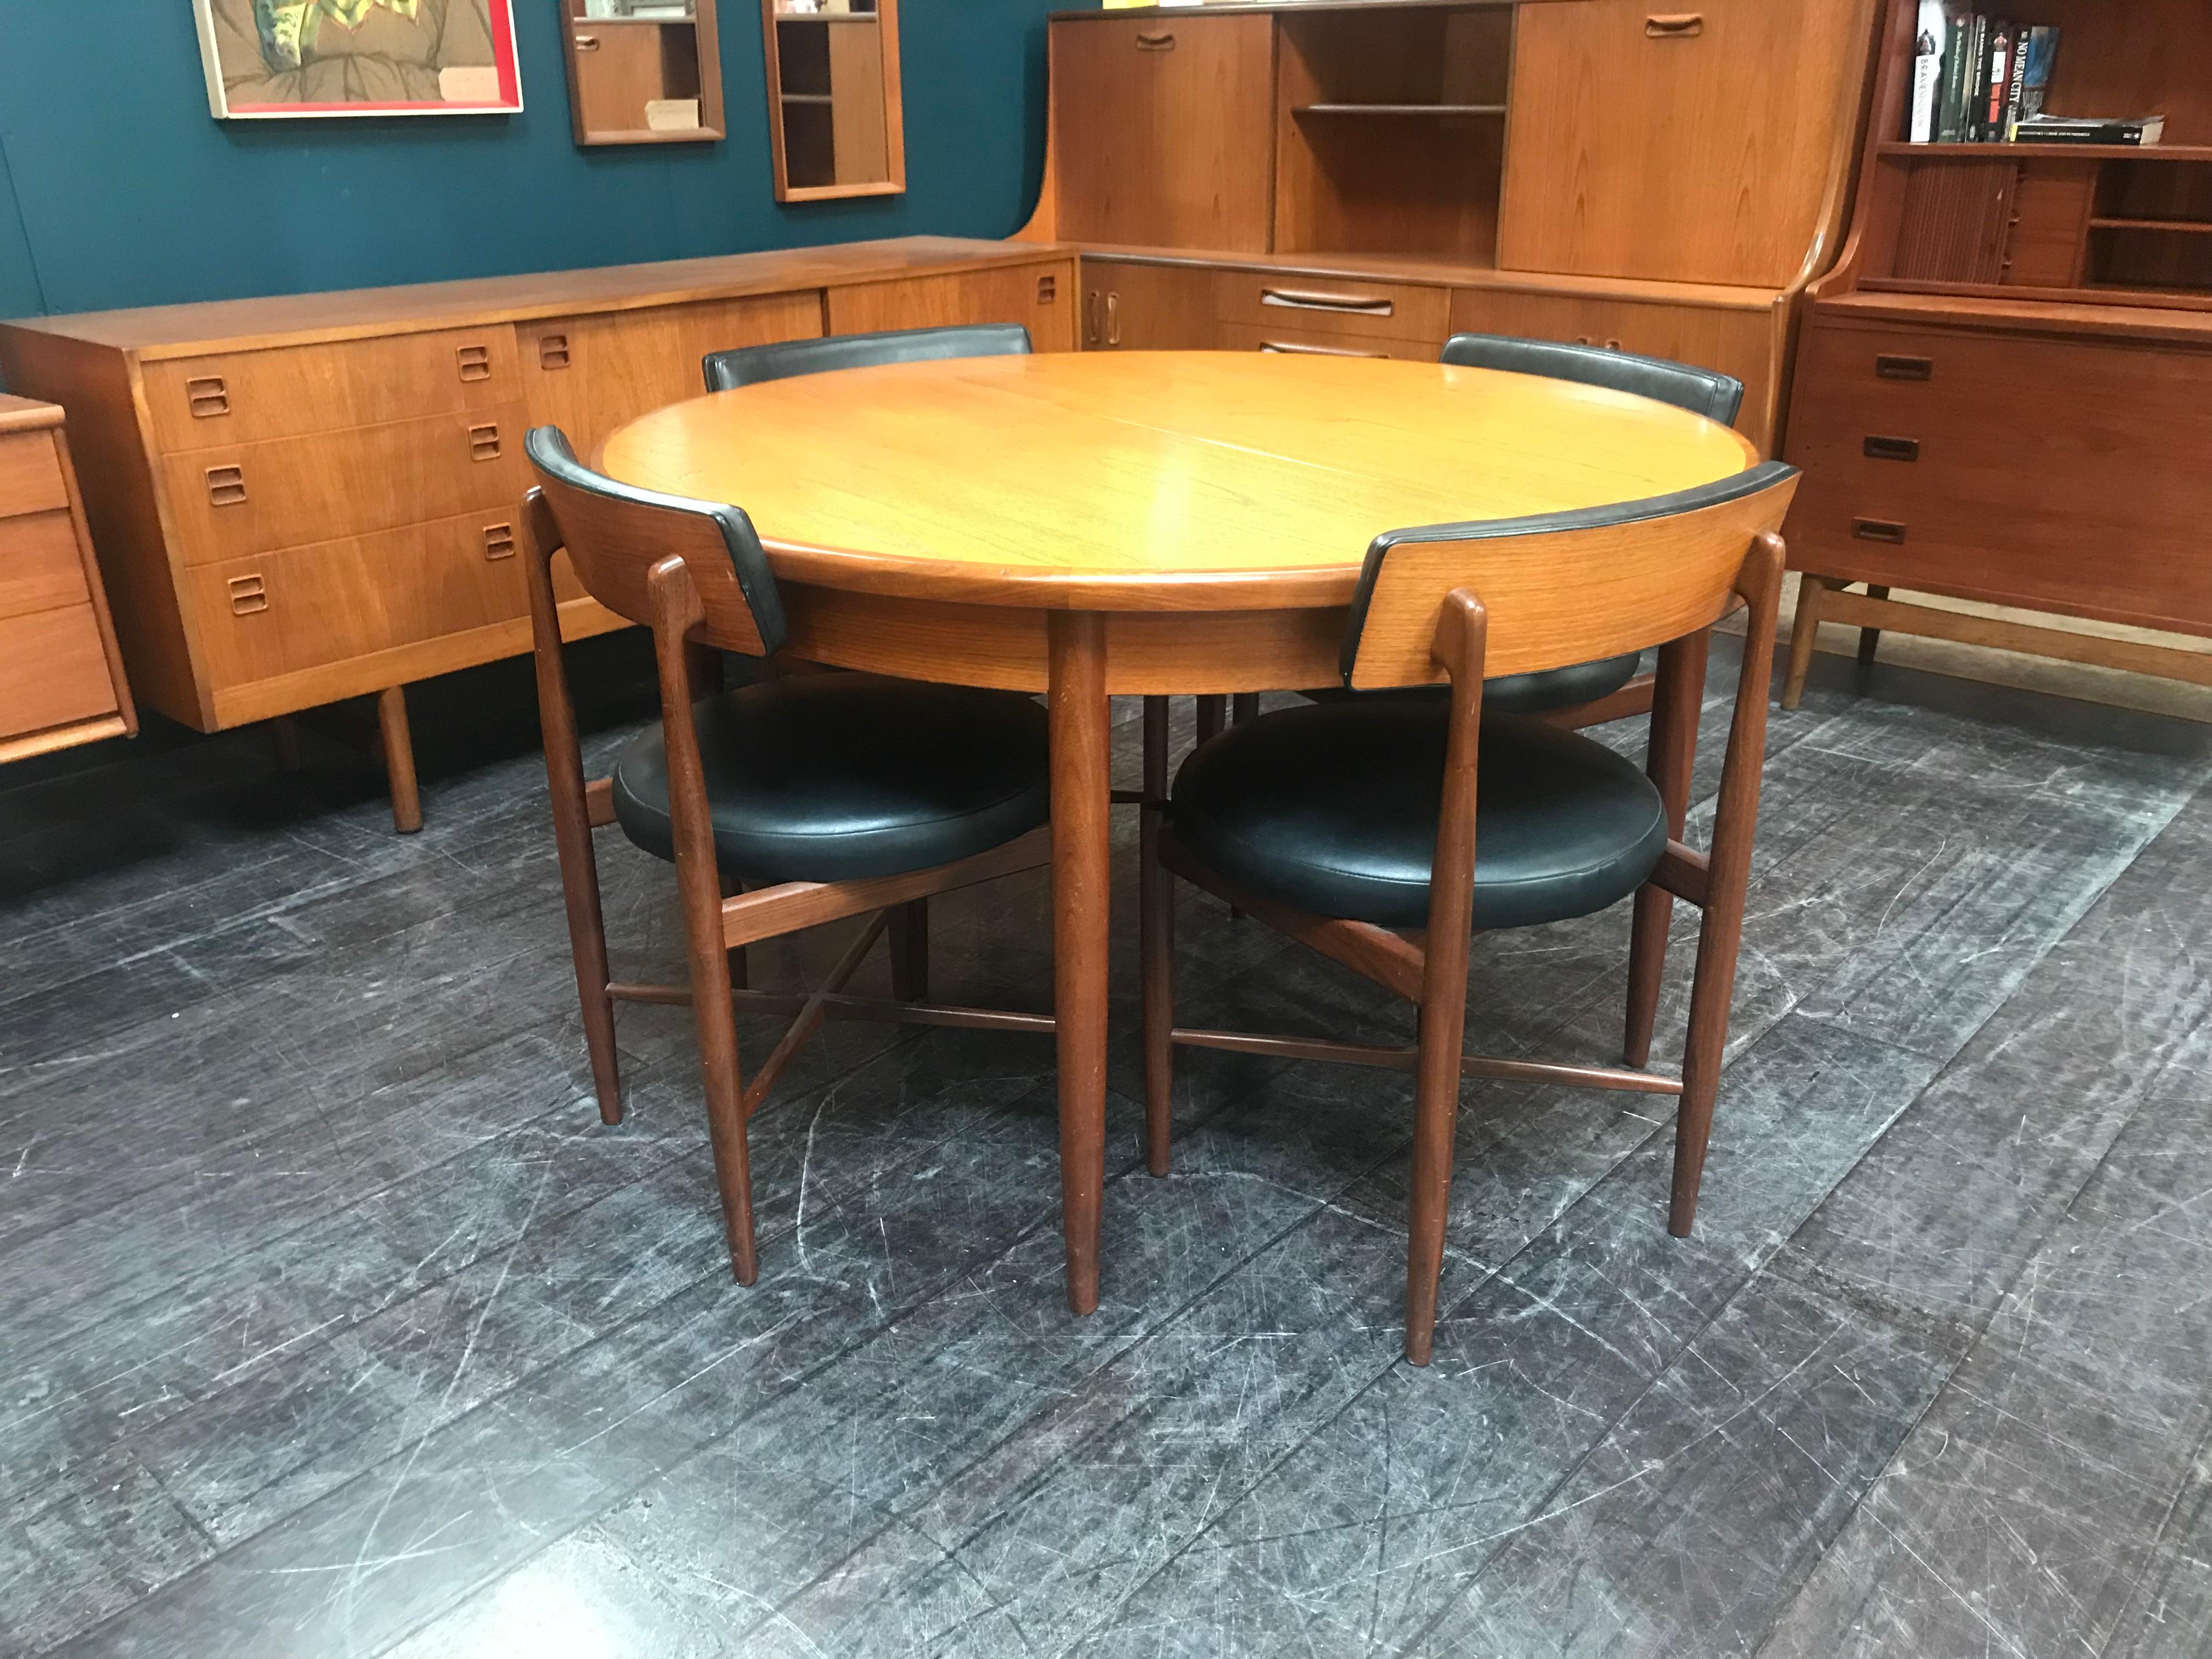 This table and chairs show a distinct Danish influence, typical of the period. This Classic midcentury dining table extends to accommodate 6 people if required. A beautifully designed & crafted extending dining table, this vintage item has that